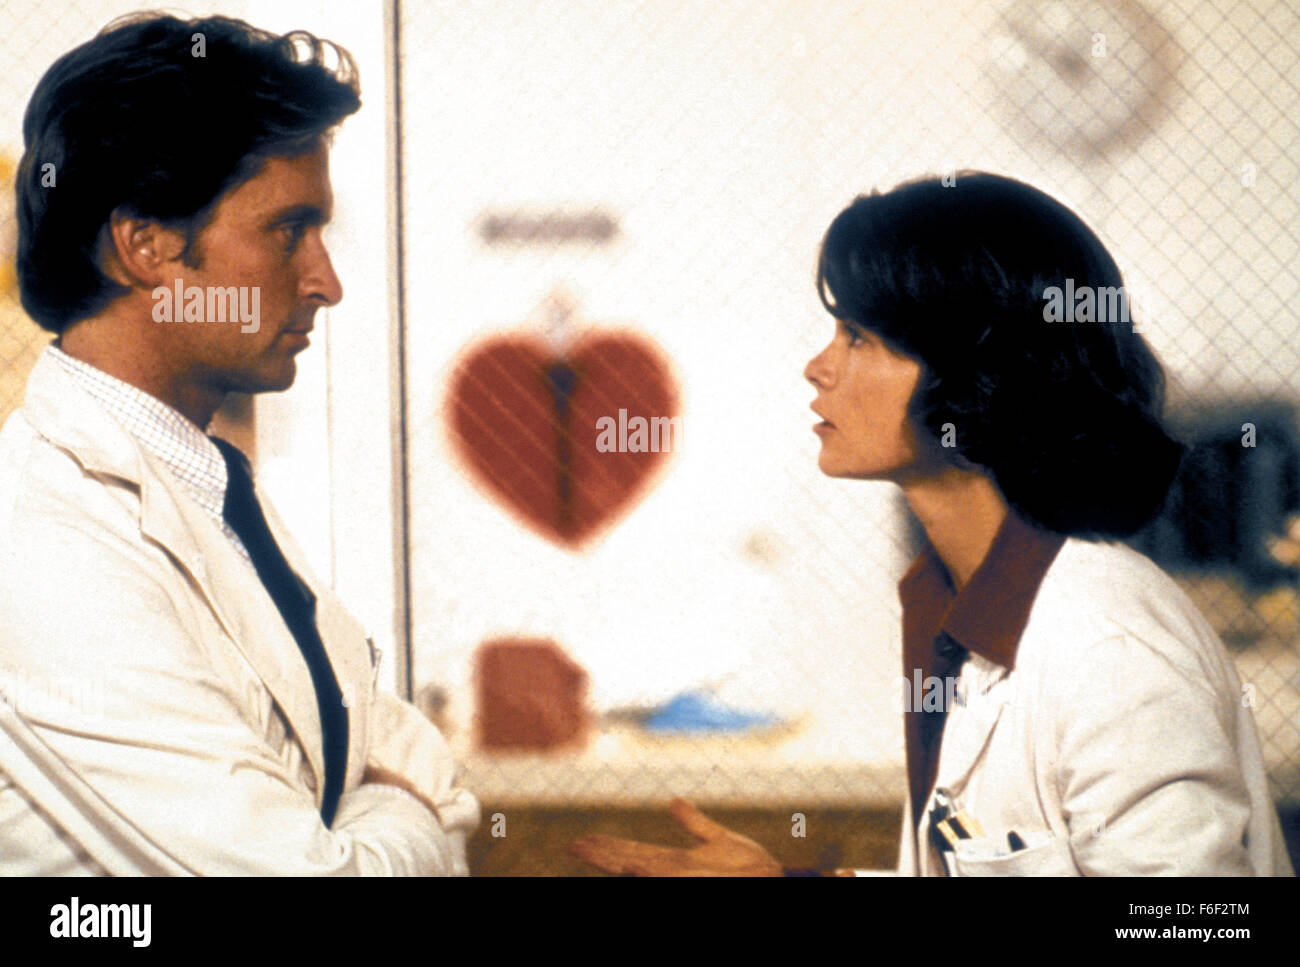 Jan 06, 1978; Los Angeles, CA, USA; MICHAEL DOUGLAS as Dr. Mark Bellows and GENEVIEVE BUJOLD as Dr Susan Wheeler in the mystery thriller film 'Coma' directed by Michael Crichton. Stock Photo